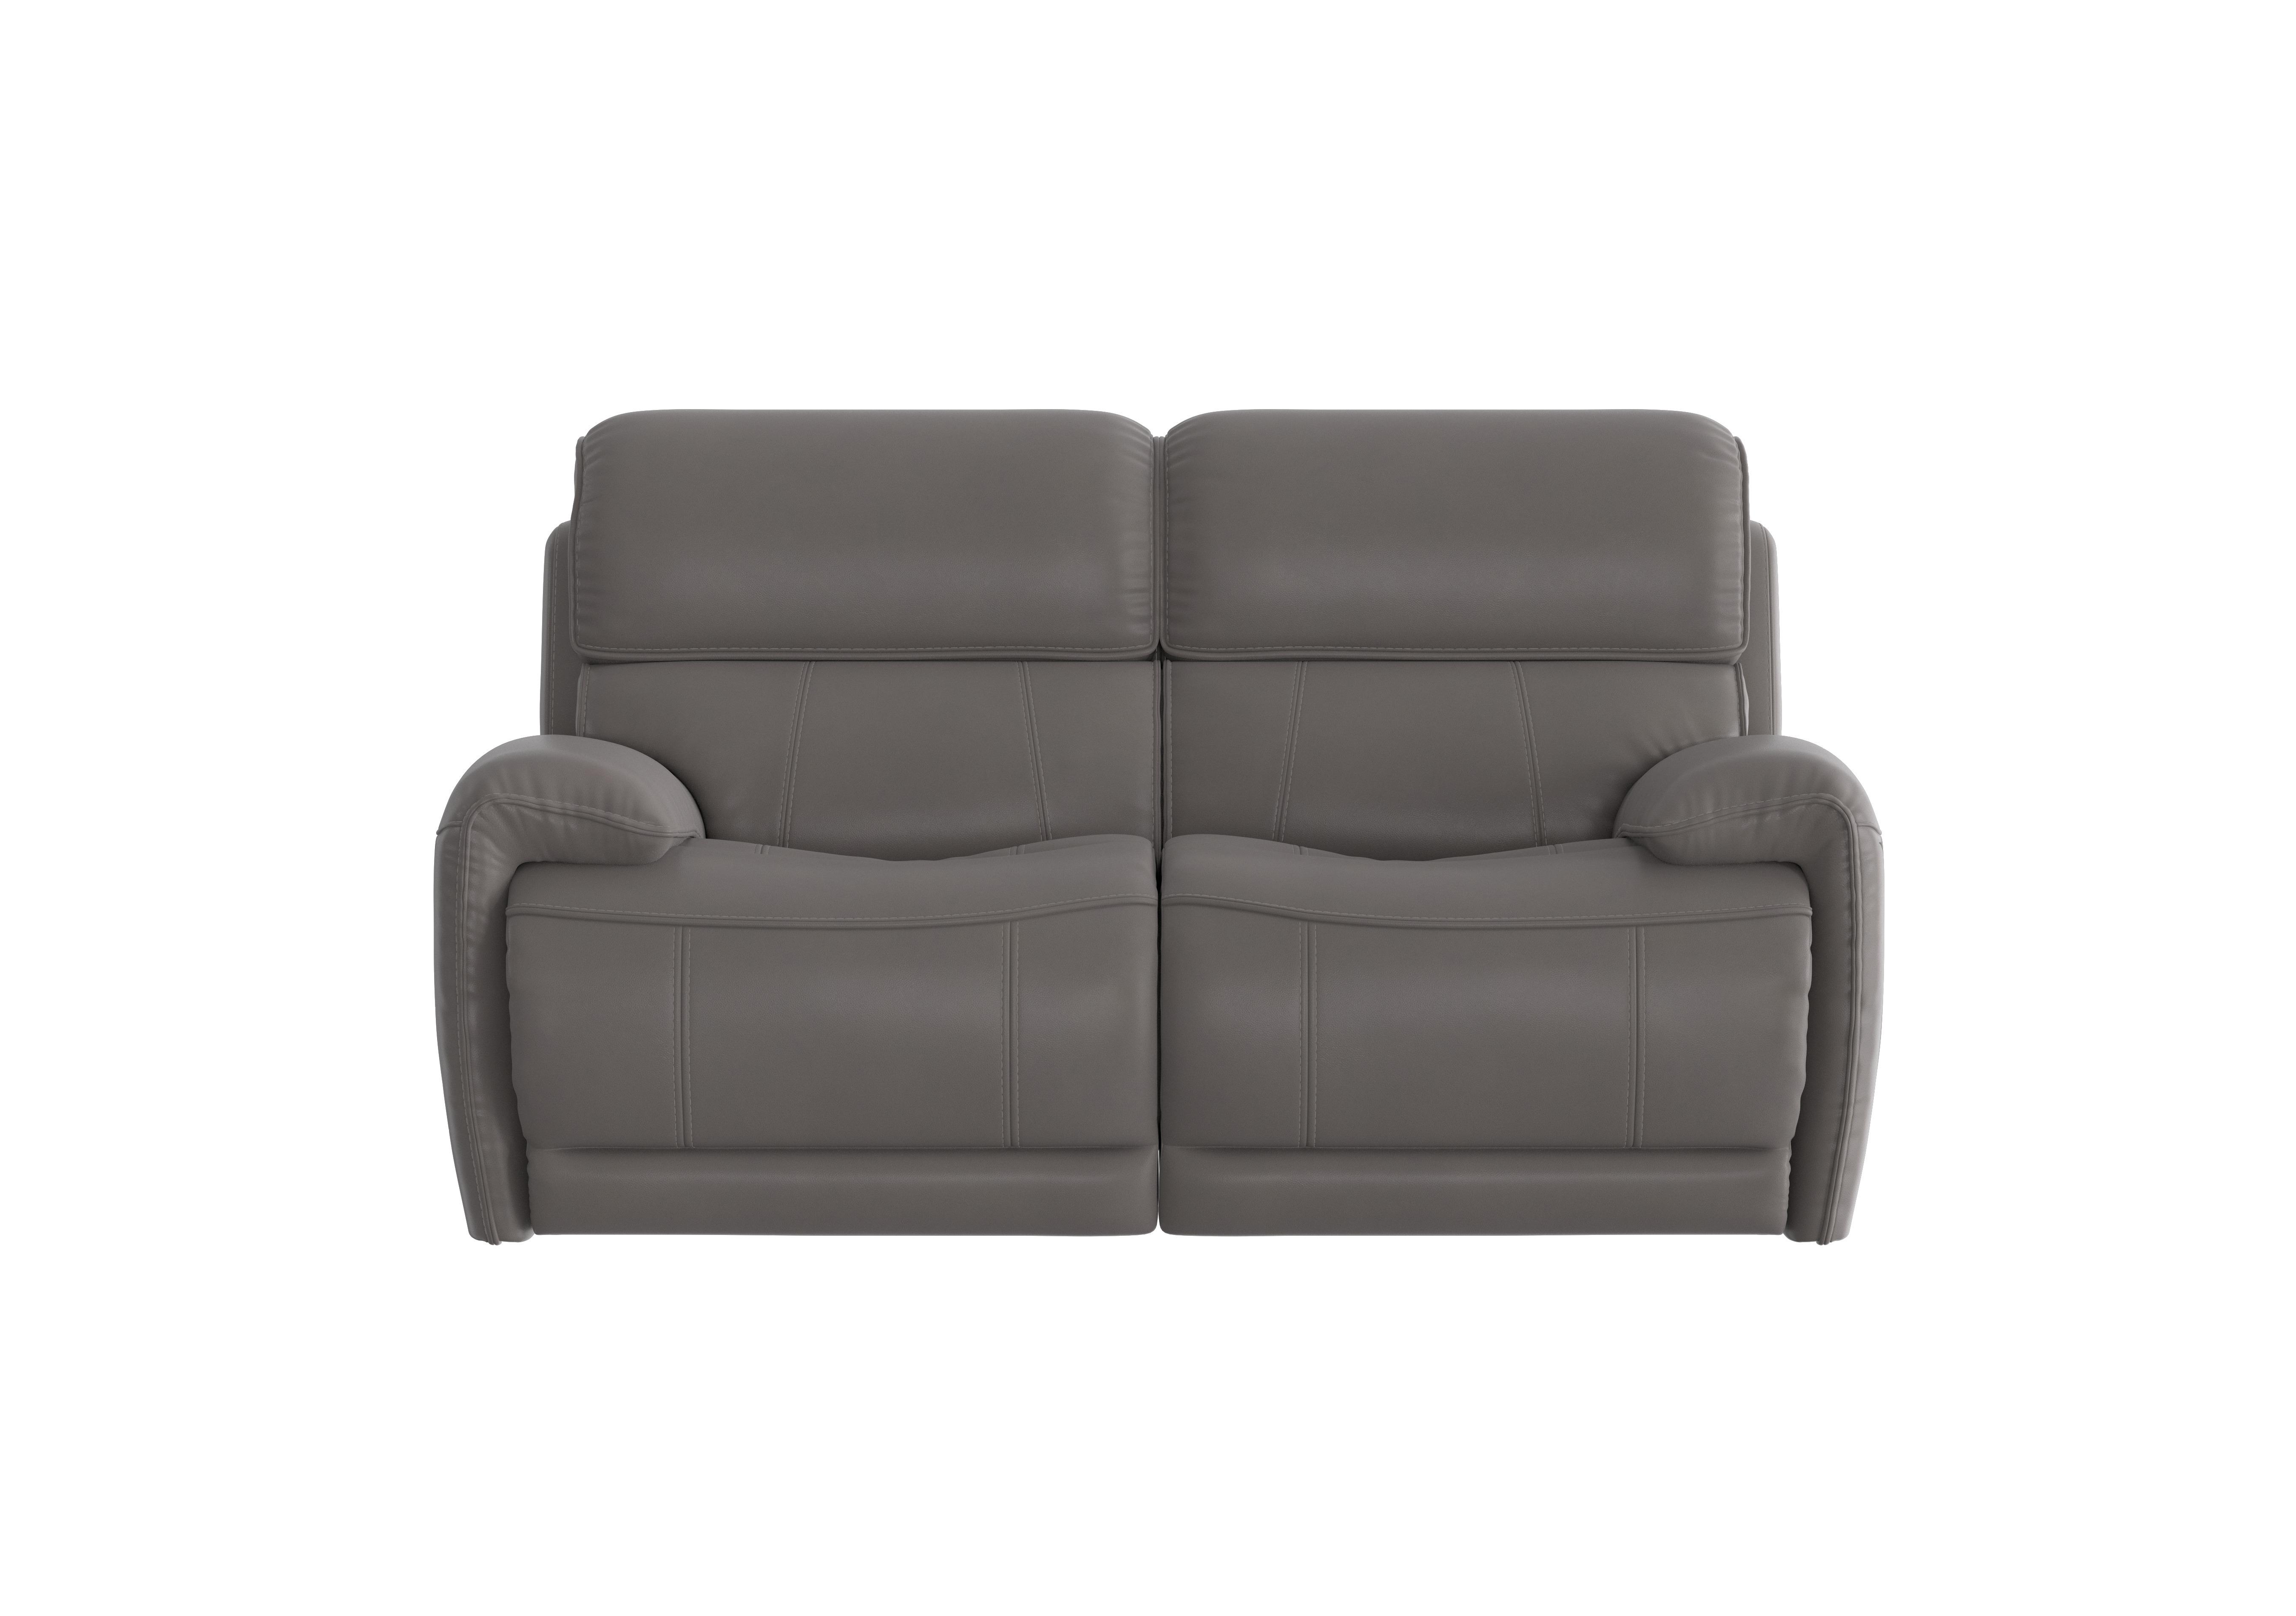 Link 2 Seater Leather Power Recliner Sofa with Power Headrests in Bv-042e Elephant on Furniture Village